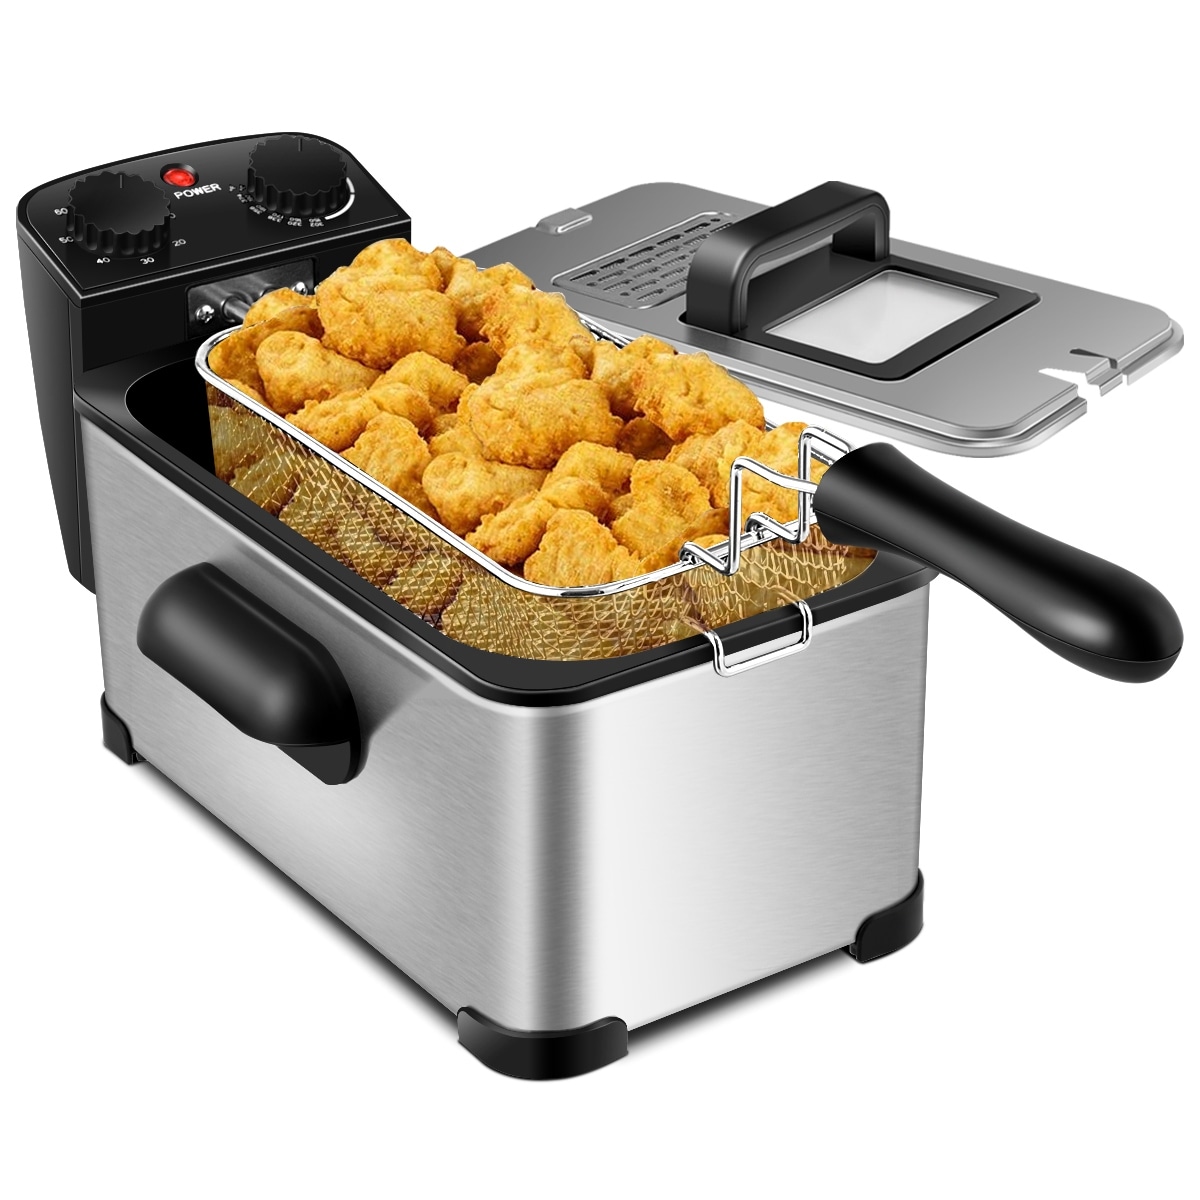 Costway 5.3 QT Electric Hot Air Fryer 1700W Stainless steel Non-Stick Fry  Basket